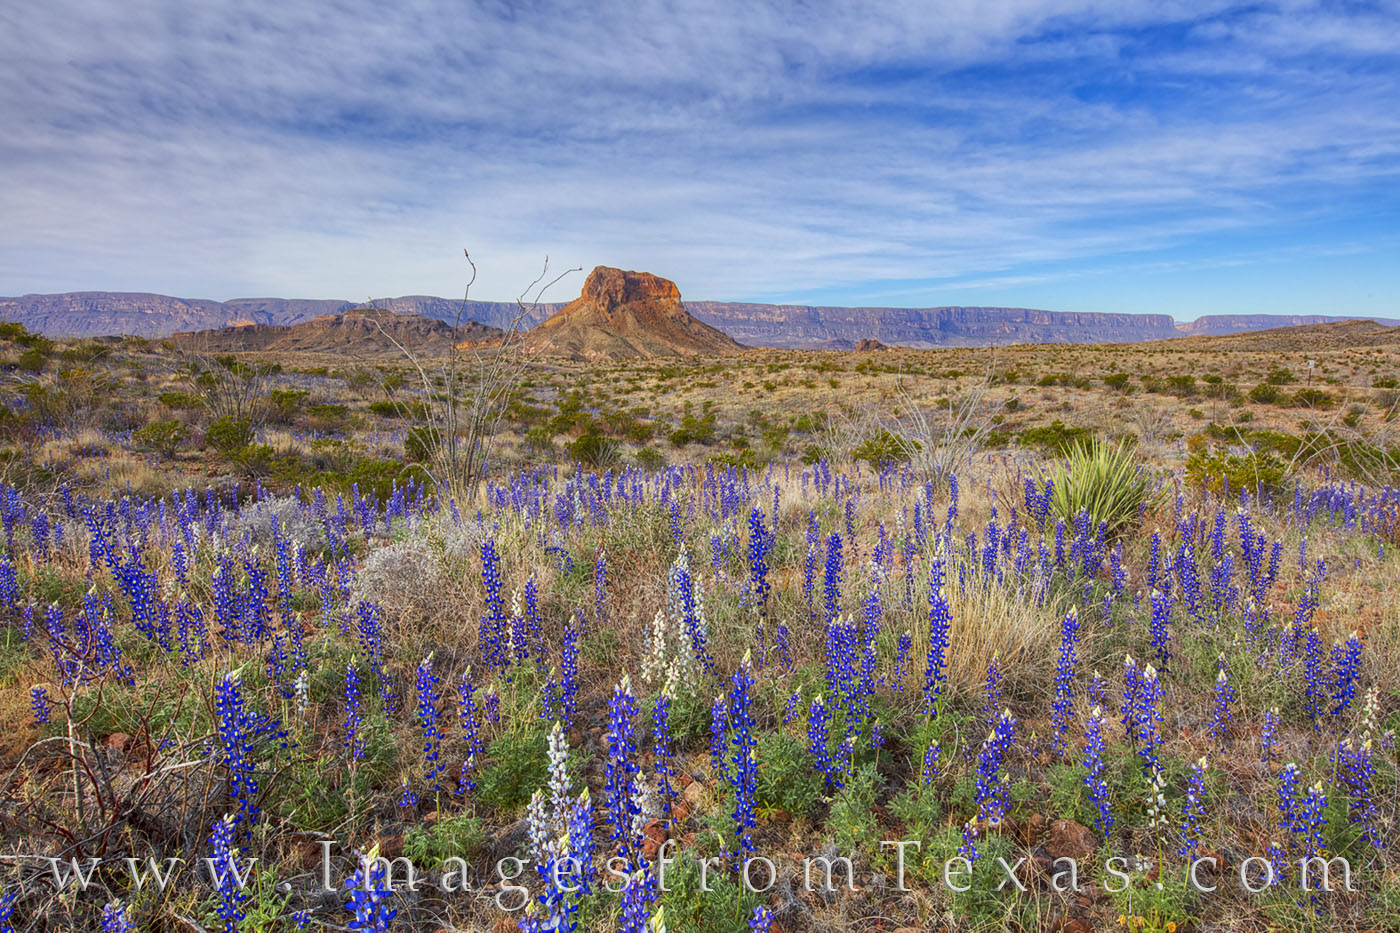 In the Chihuahuan Desert of Big Bend National Park, every few years the bluebonnets put on a good show. In Februay of 2019, perhaps...